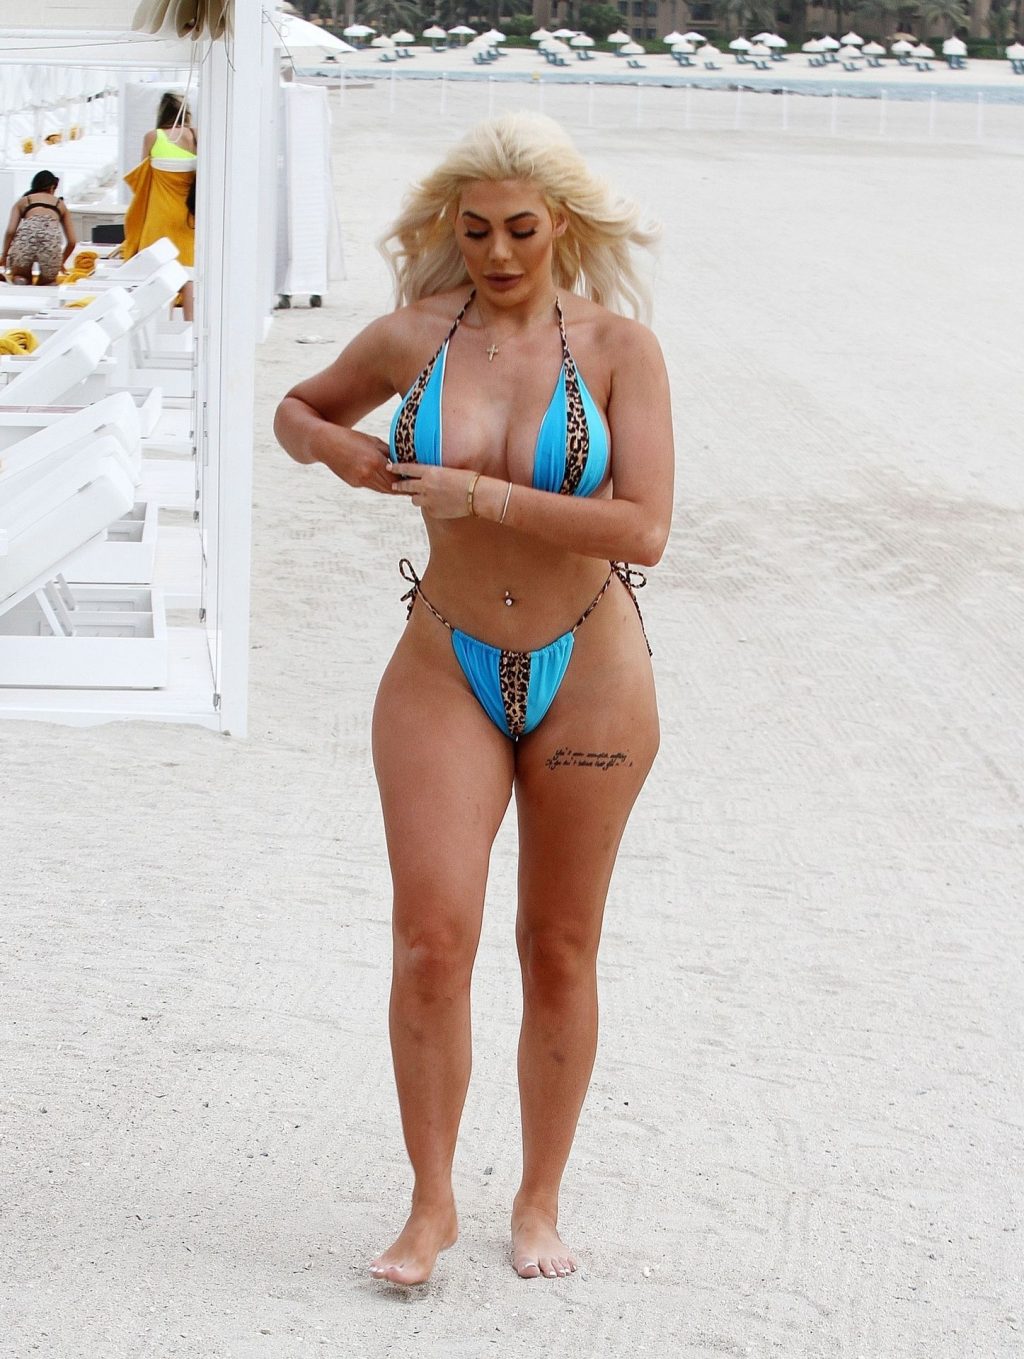 Chloe Ferry Pictured Showing Off Her Sexy Body in Dubai (13 Photos)